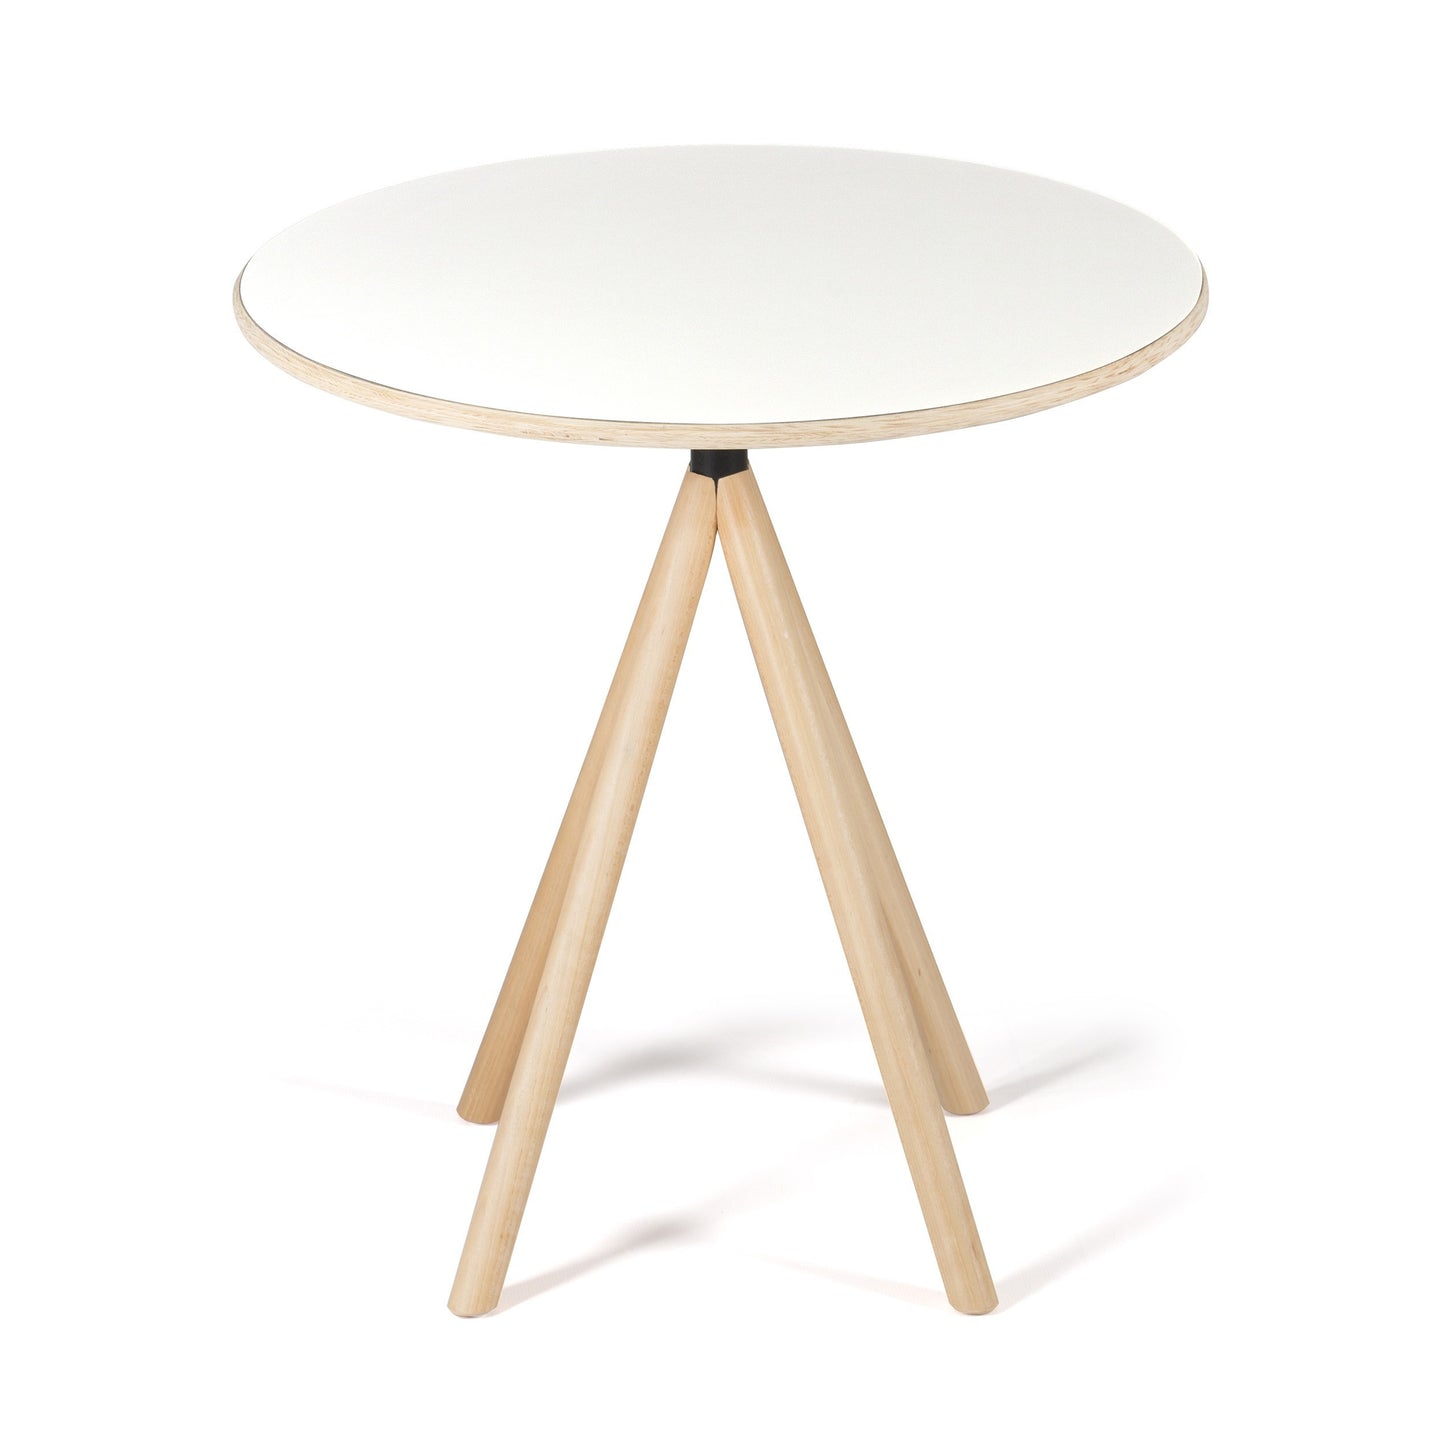 Table Mannequin MO 01-70 - White